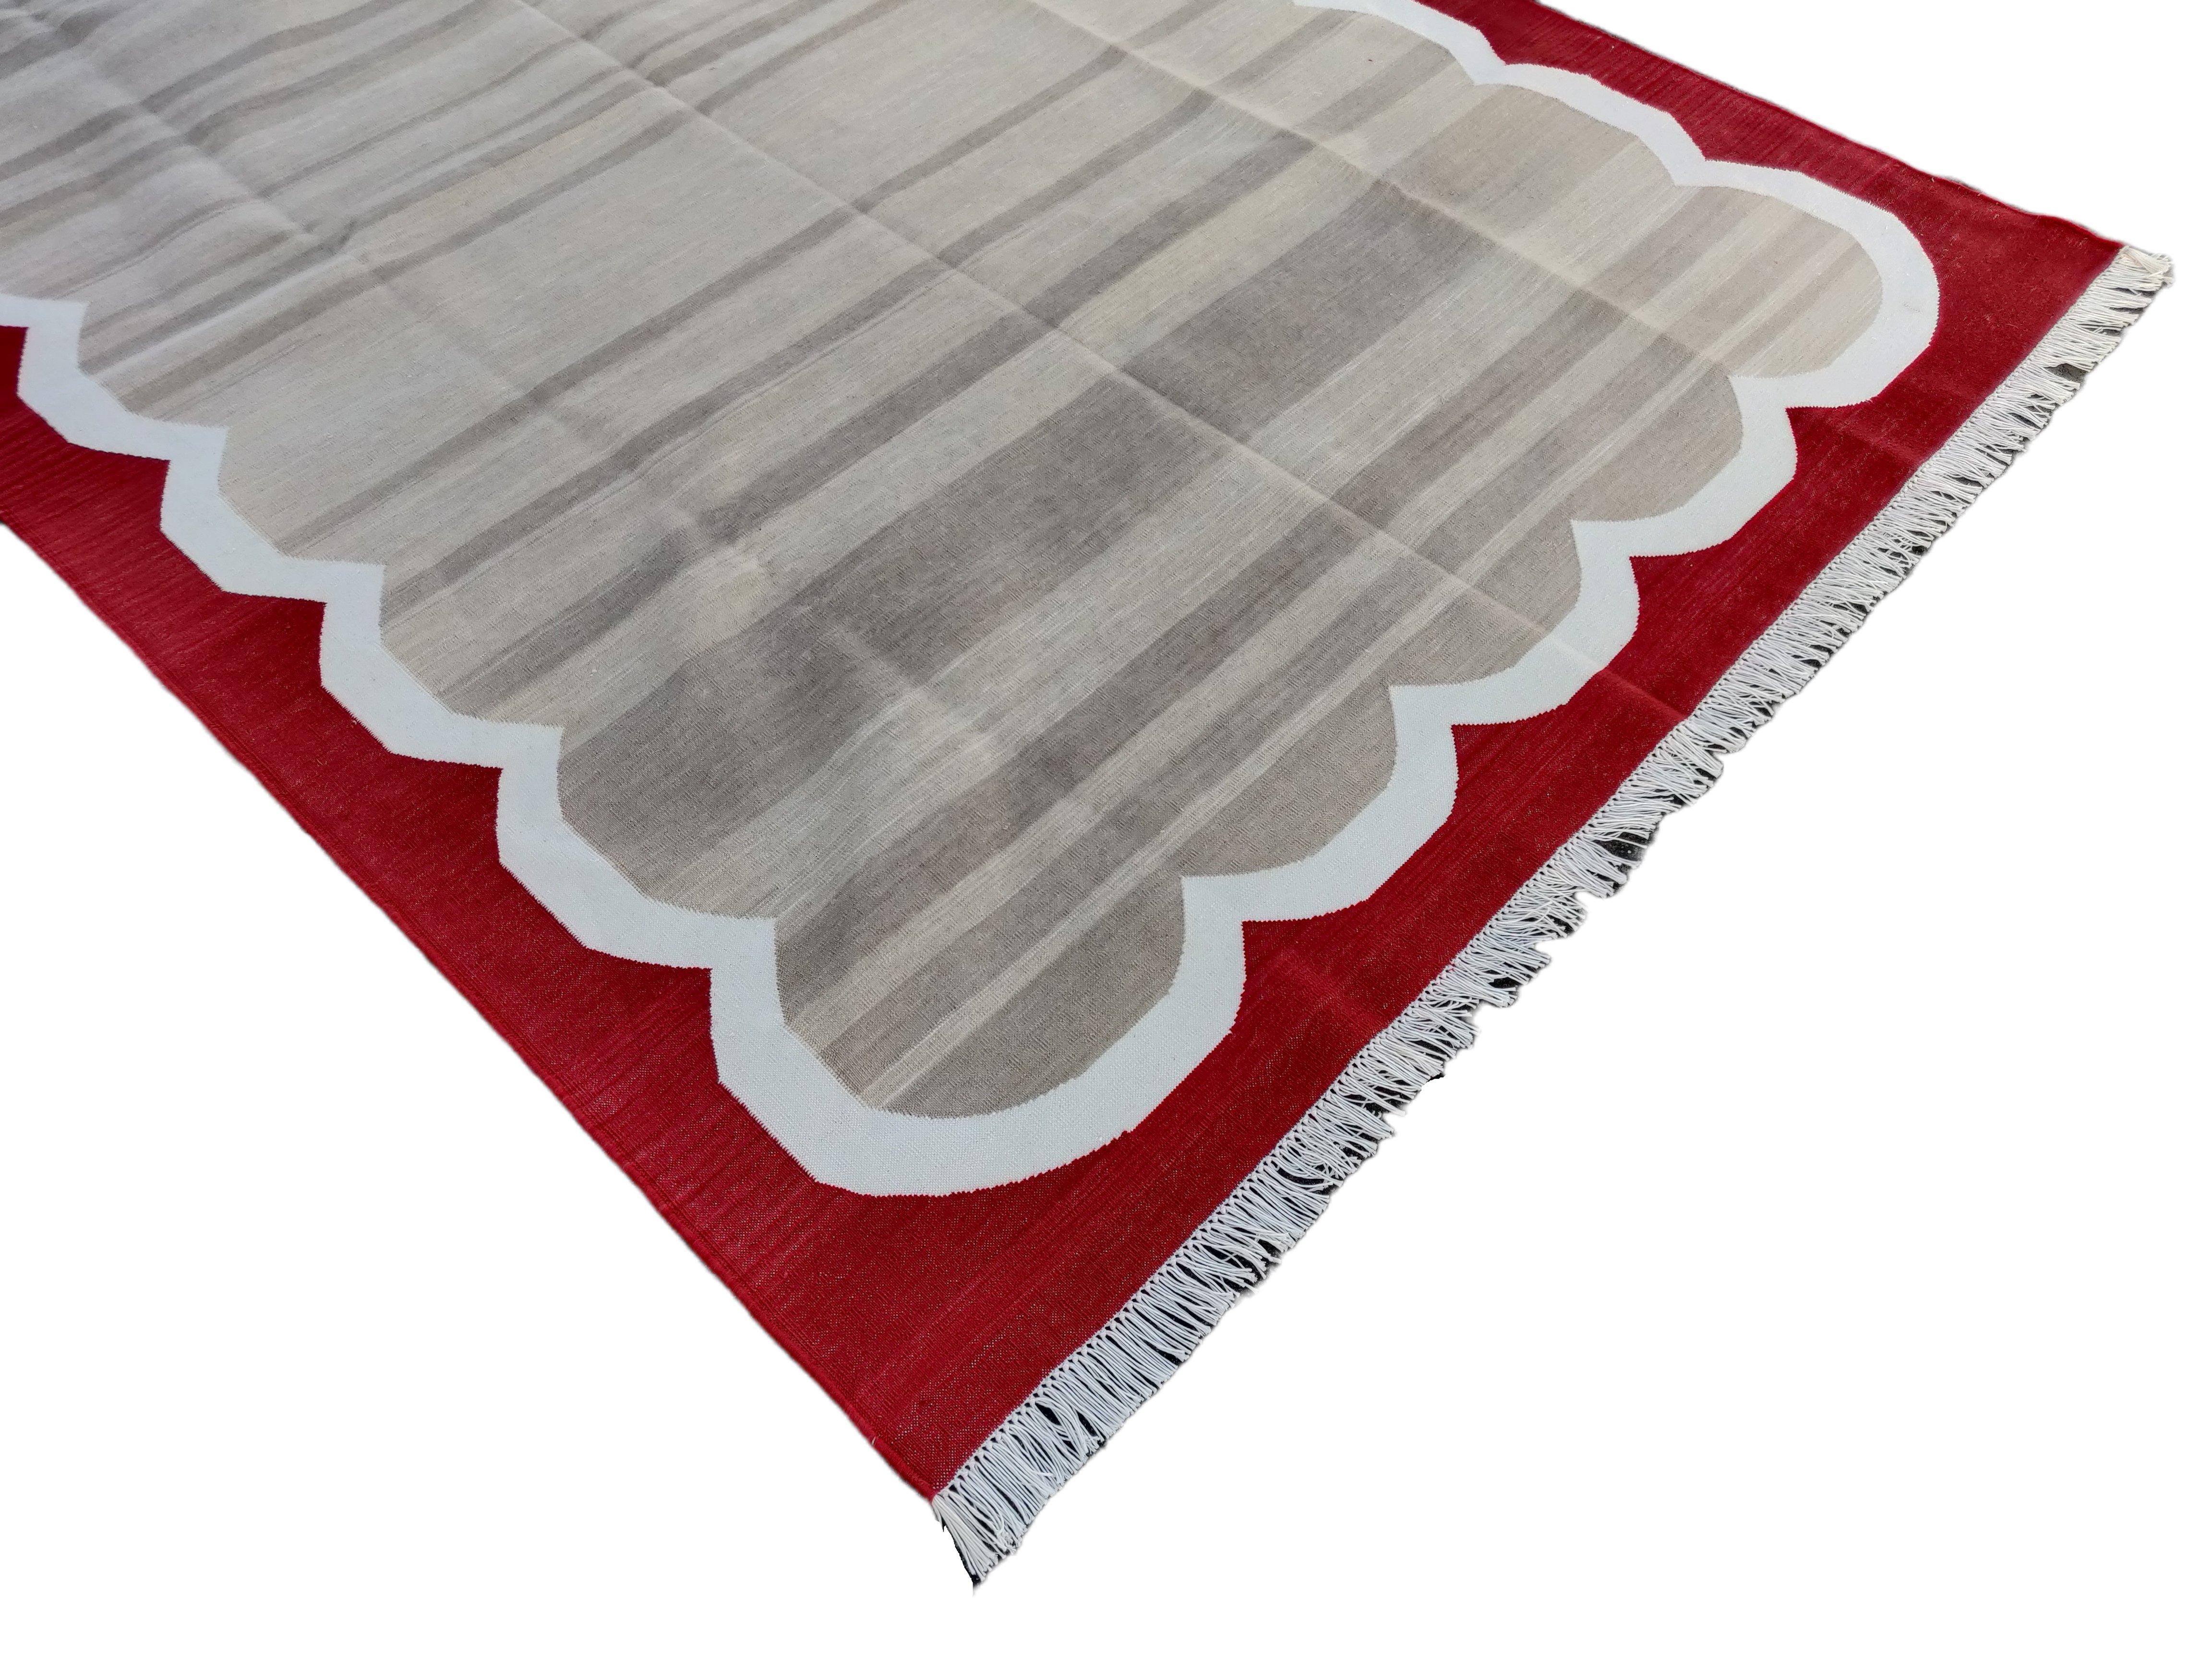 Mid-Century Modern Handmade Cotton Area Flat Weave Rug, 5x8 Beige And Red Scalloped Indian Dhurrie For Sale